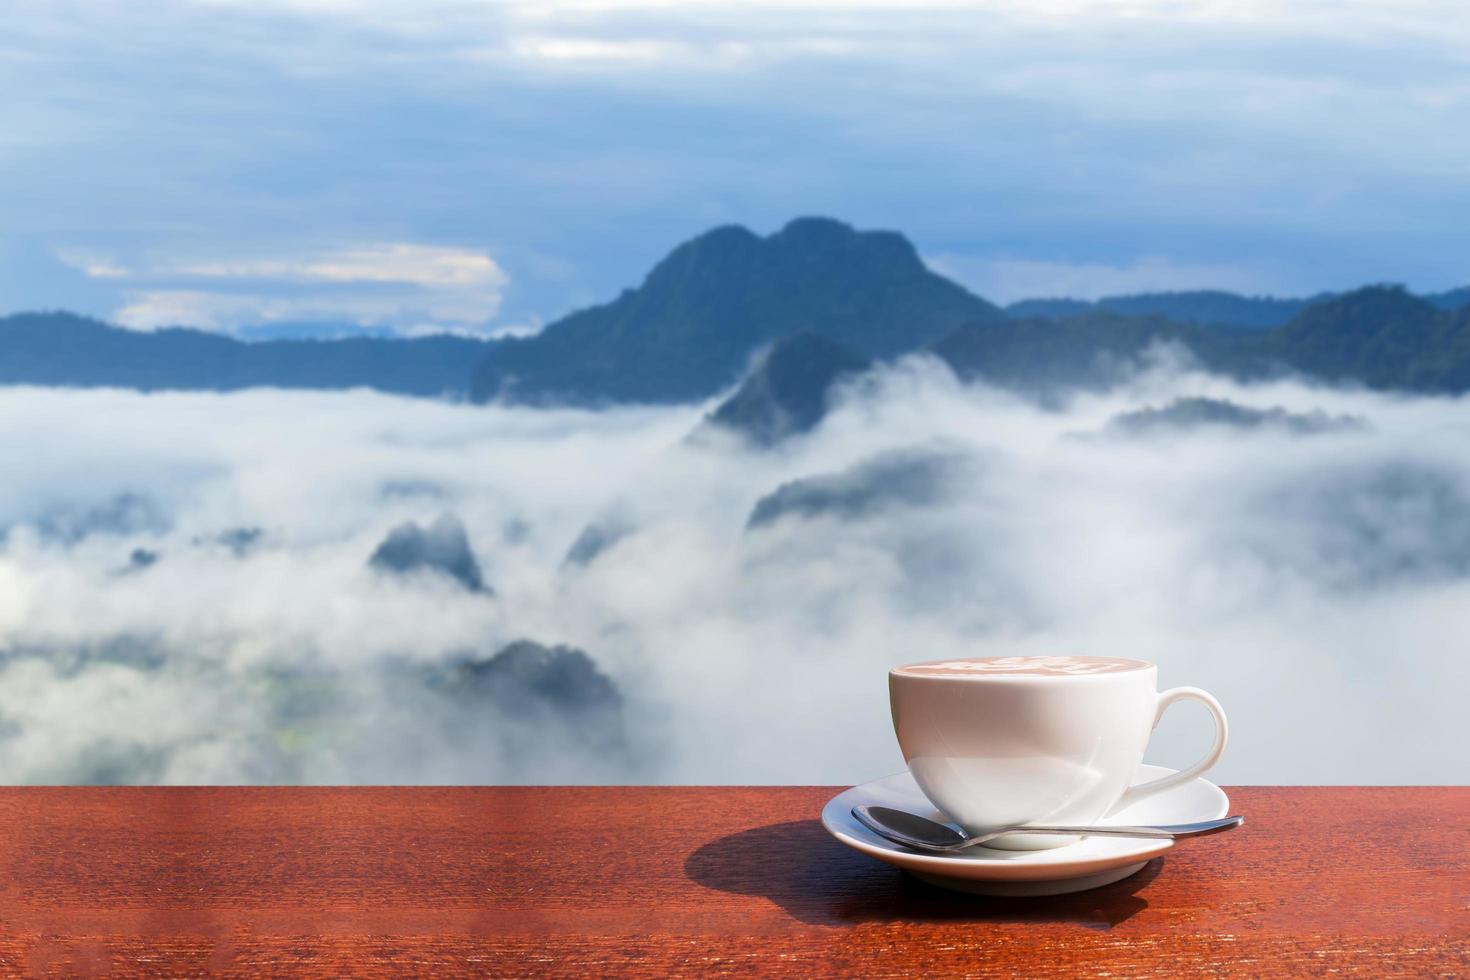 White coffee mug on wooden table, misty background and mountains  in winter at Phu Langka, Thailand photo